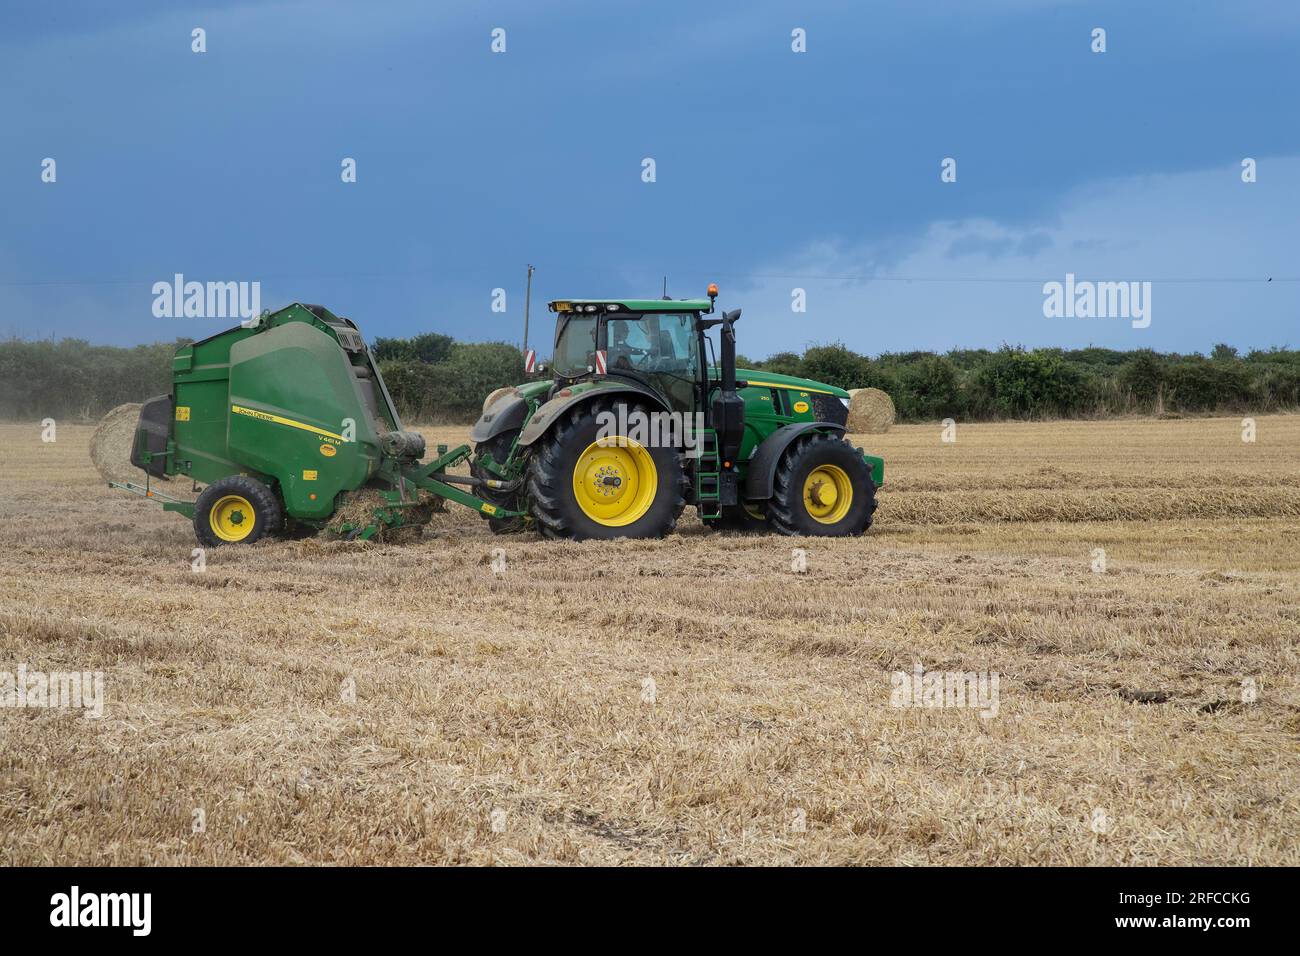 John Deere Tractor and V461M variable chamber baler producing round hay bales in a wheat field during harvesting Stock Photo